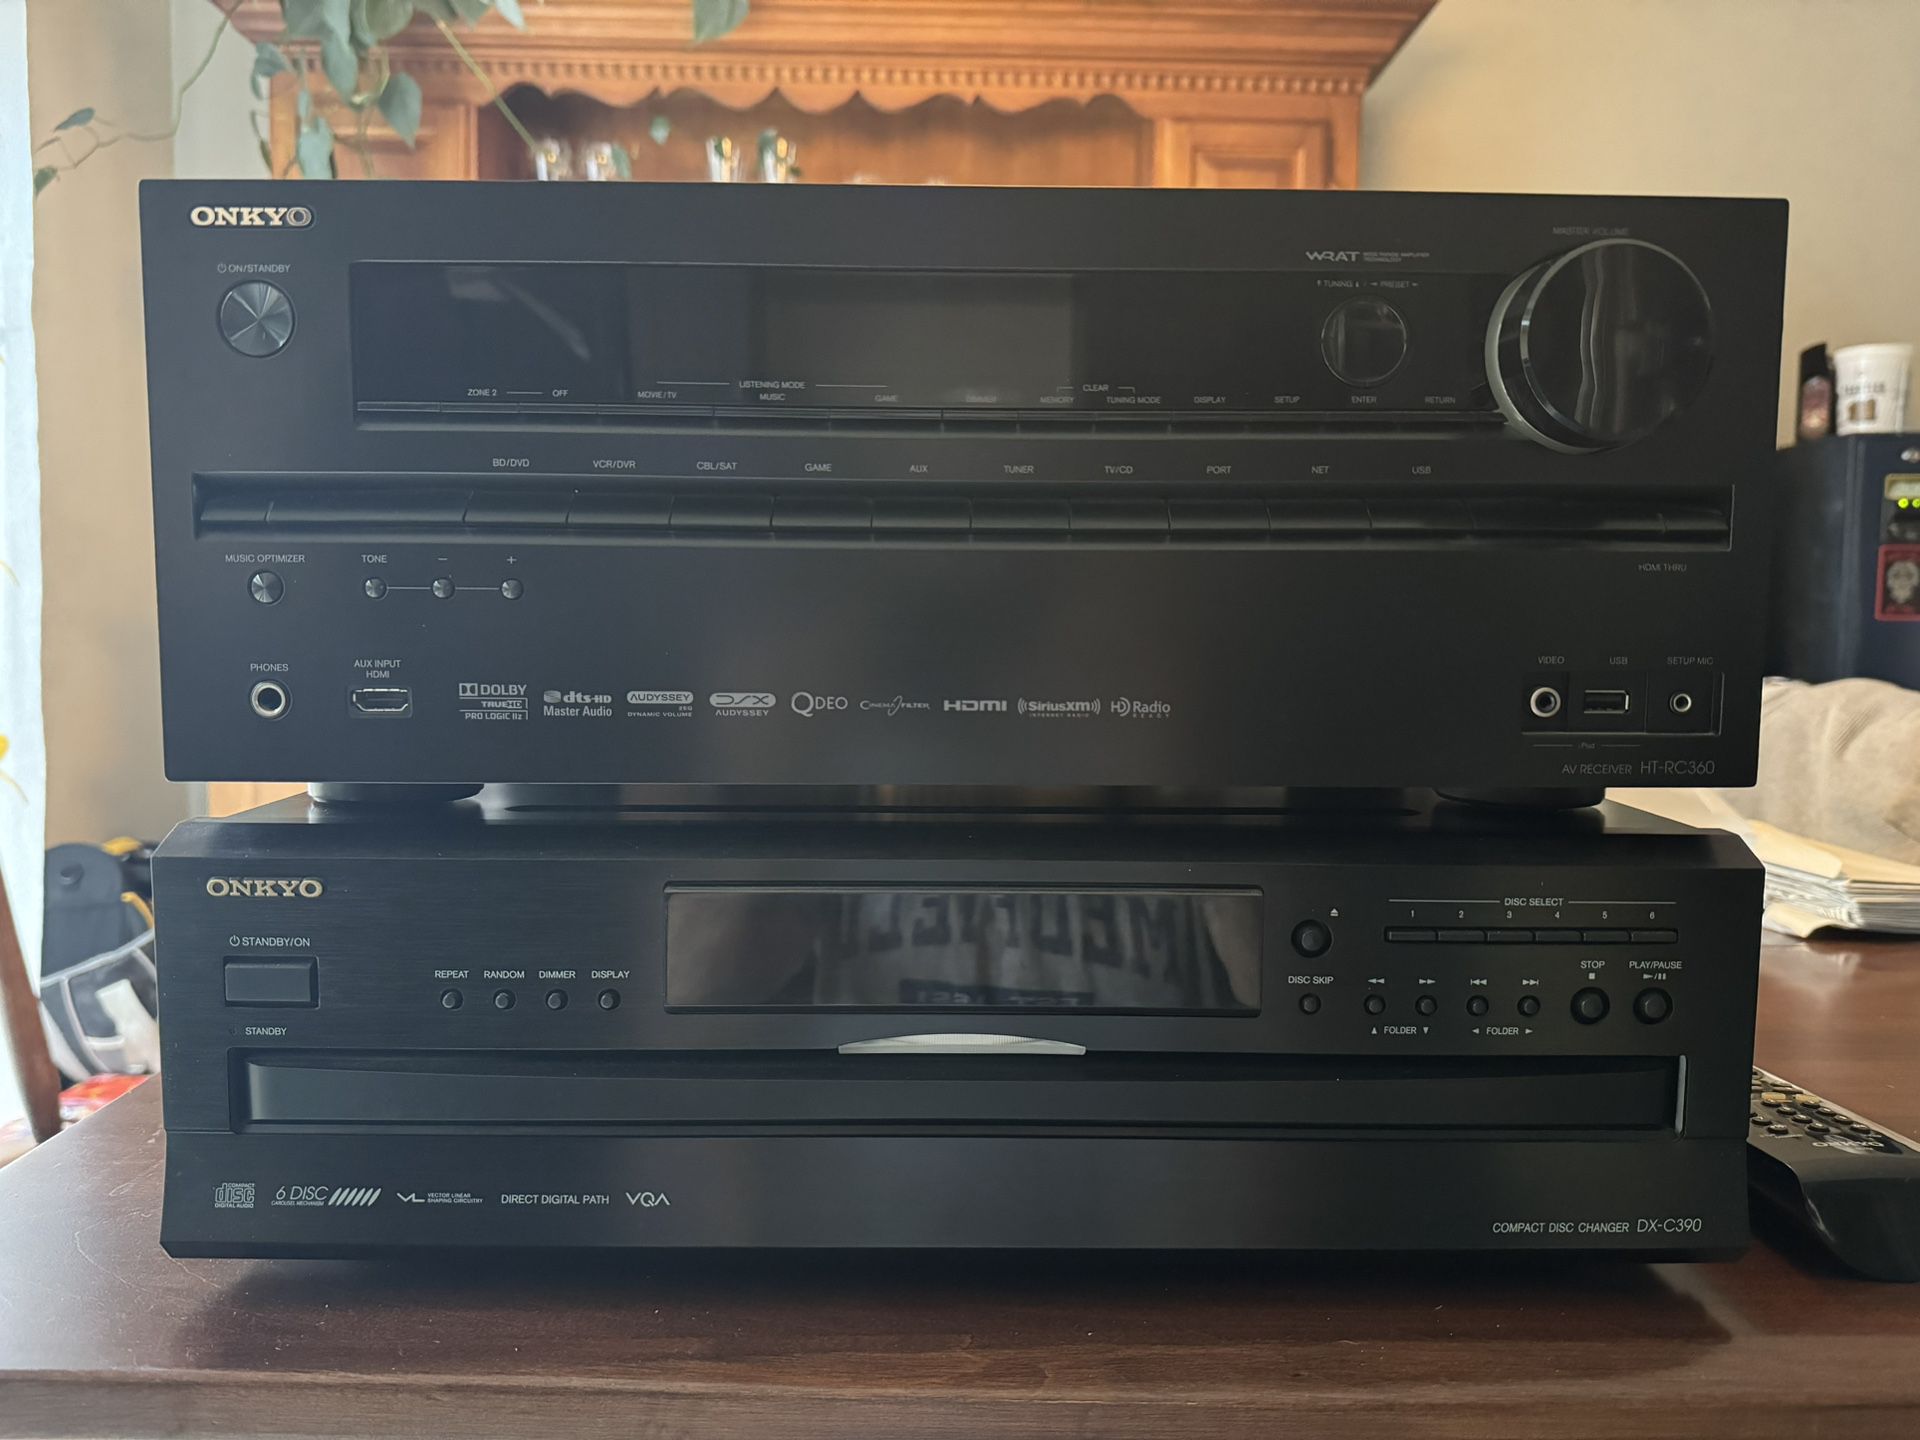 Onkyo Receiver And 6 Disk CD Changer